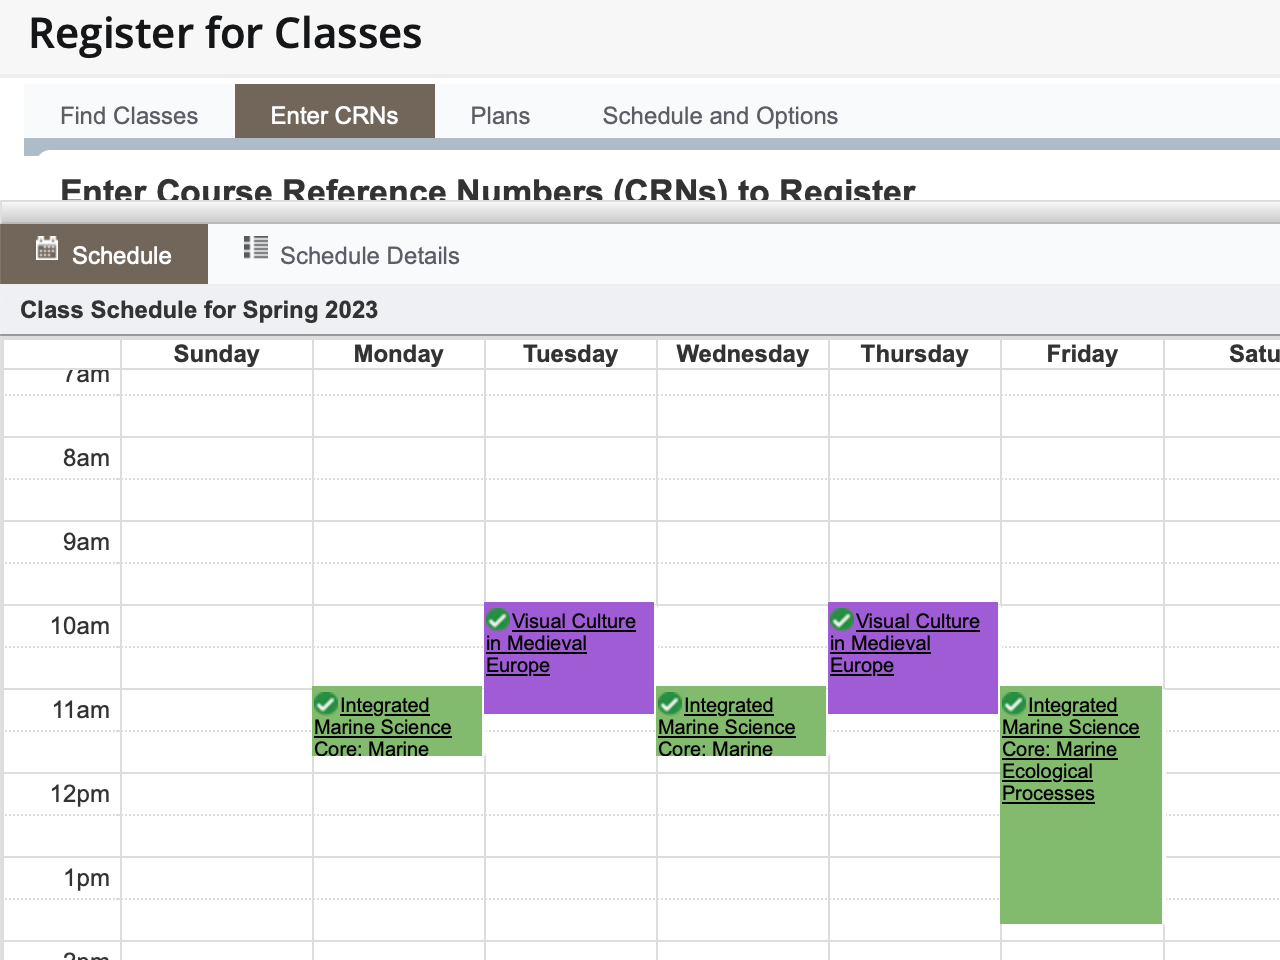 A student schedule is shown with courses in different colors corresponding to their time slot.